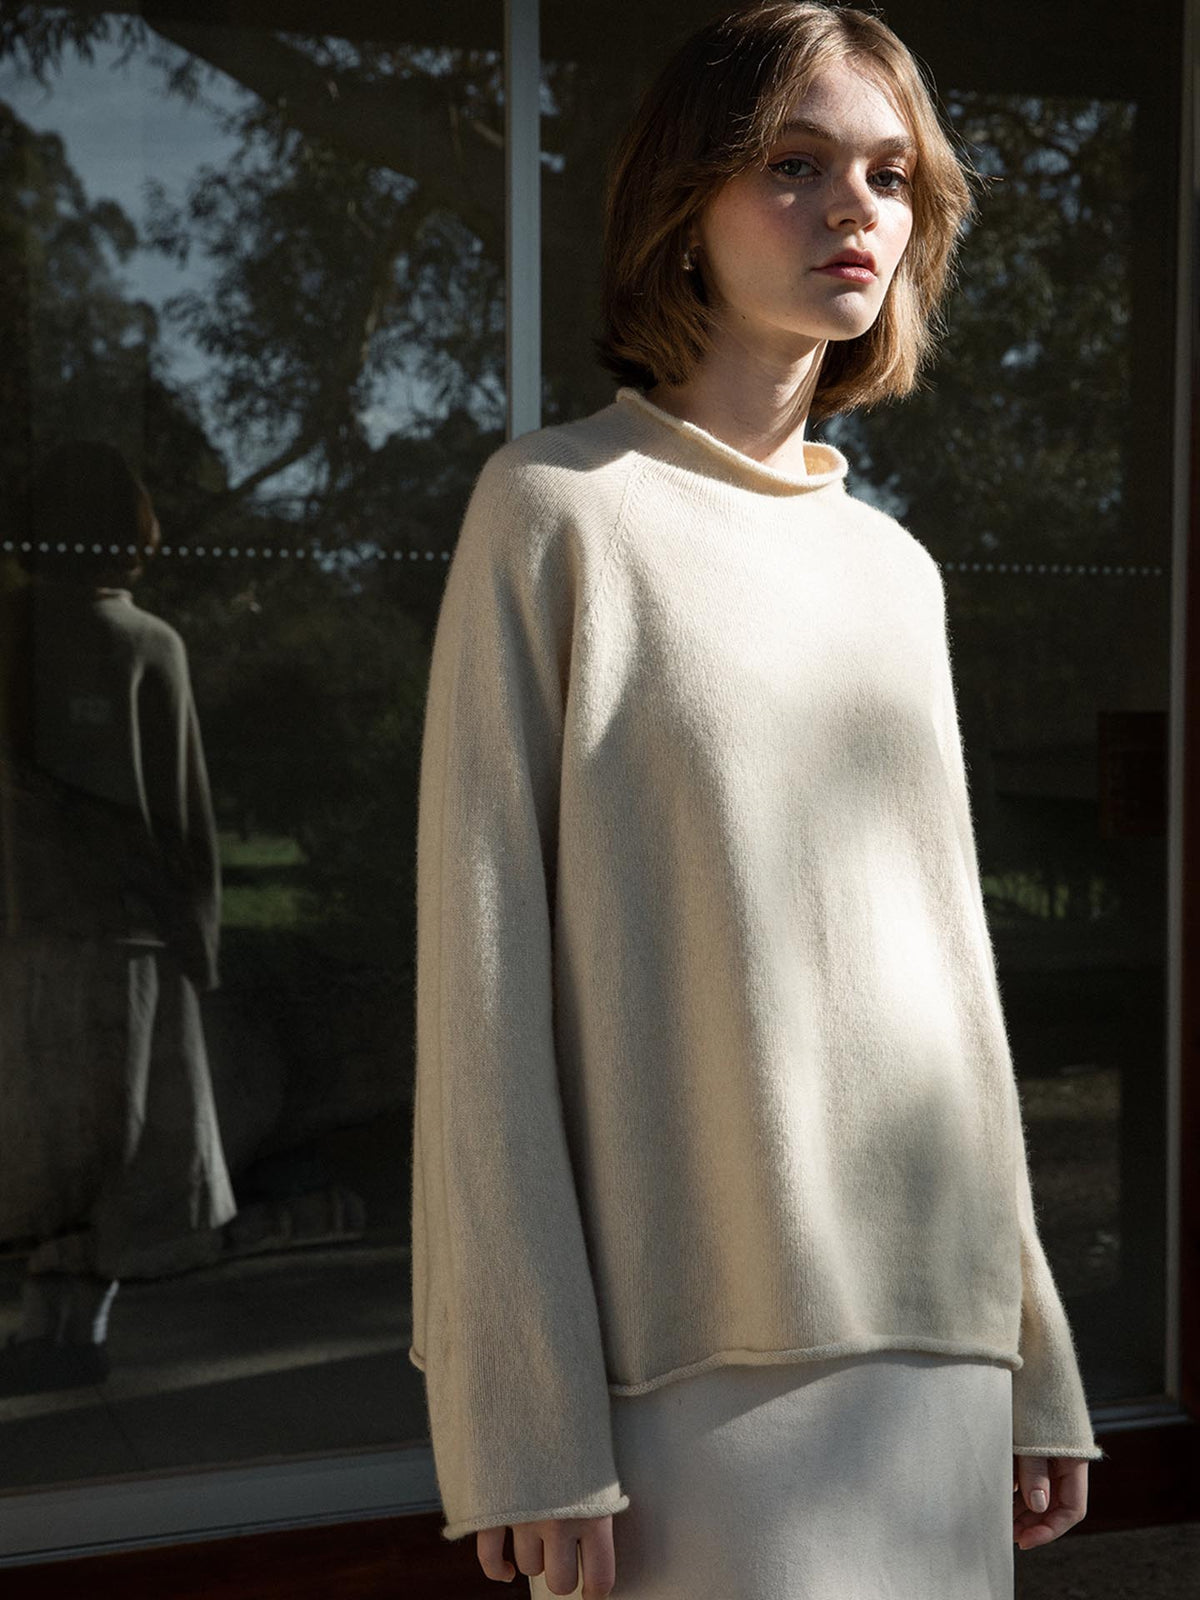 Petite young woman in an oversized Francie white sweater standing in sunlight by a window, with her reflection visible on the glass.